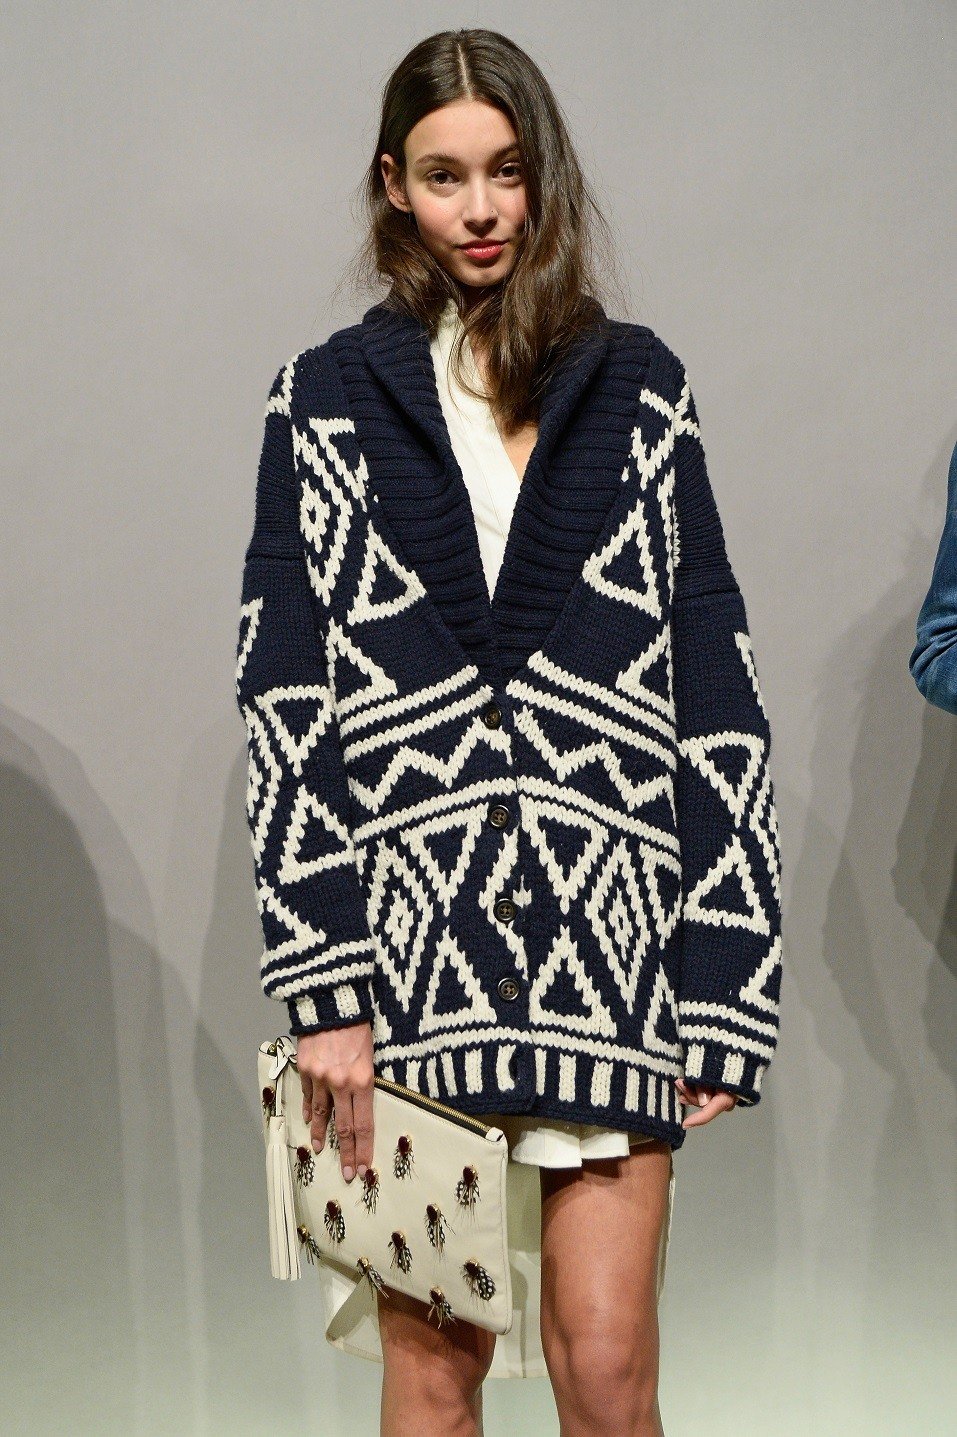 A model poses at the J.Crew presentation during Mercedes-Benz Fashion Week